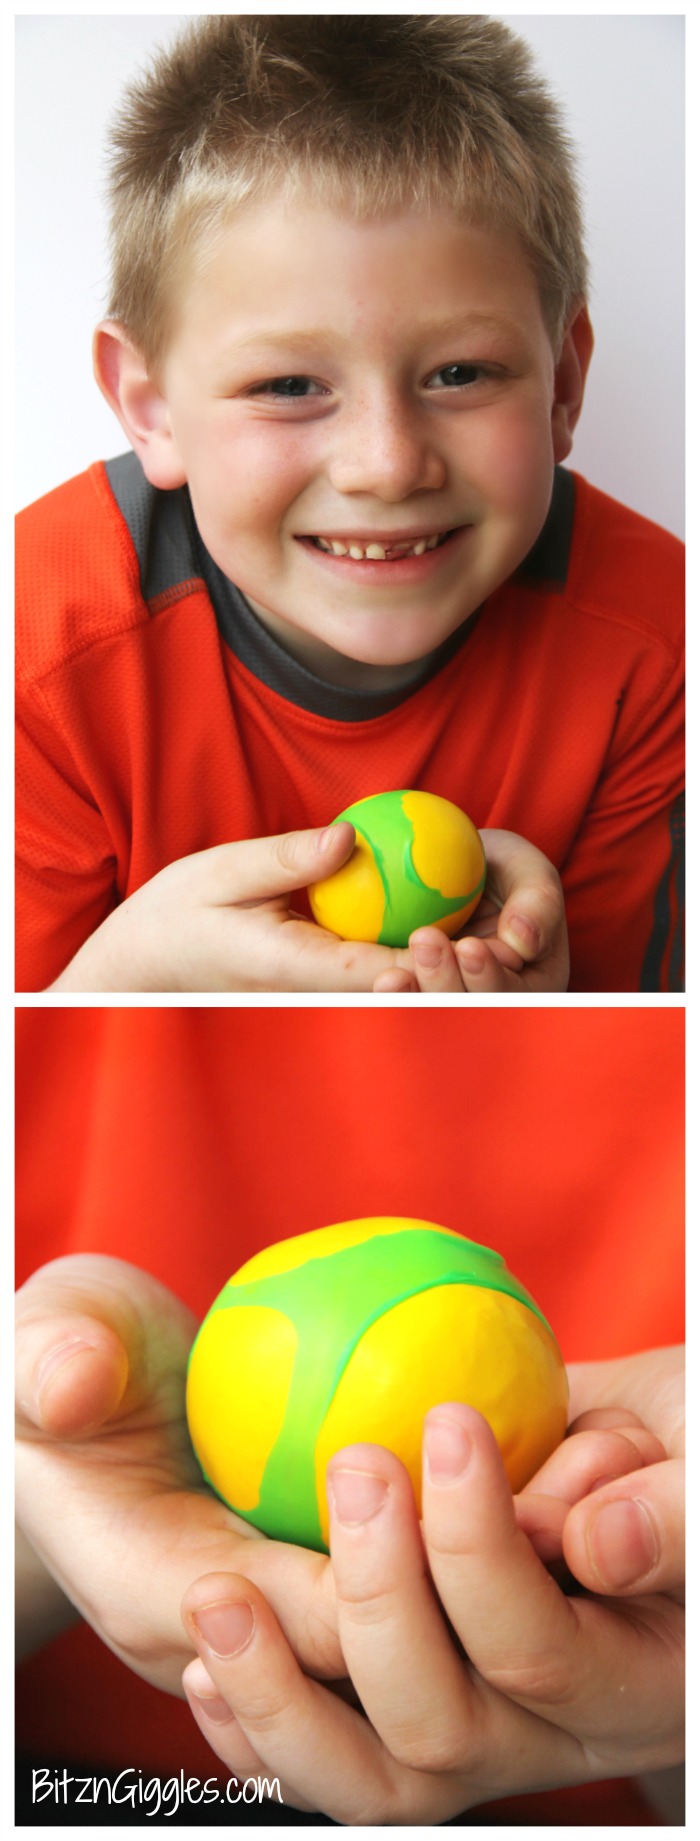 Kids Squeeze Ball - Stress ball, squishy ball whatever you'd like to call it. This toy keeps kids busy for hours and they are simple to make!